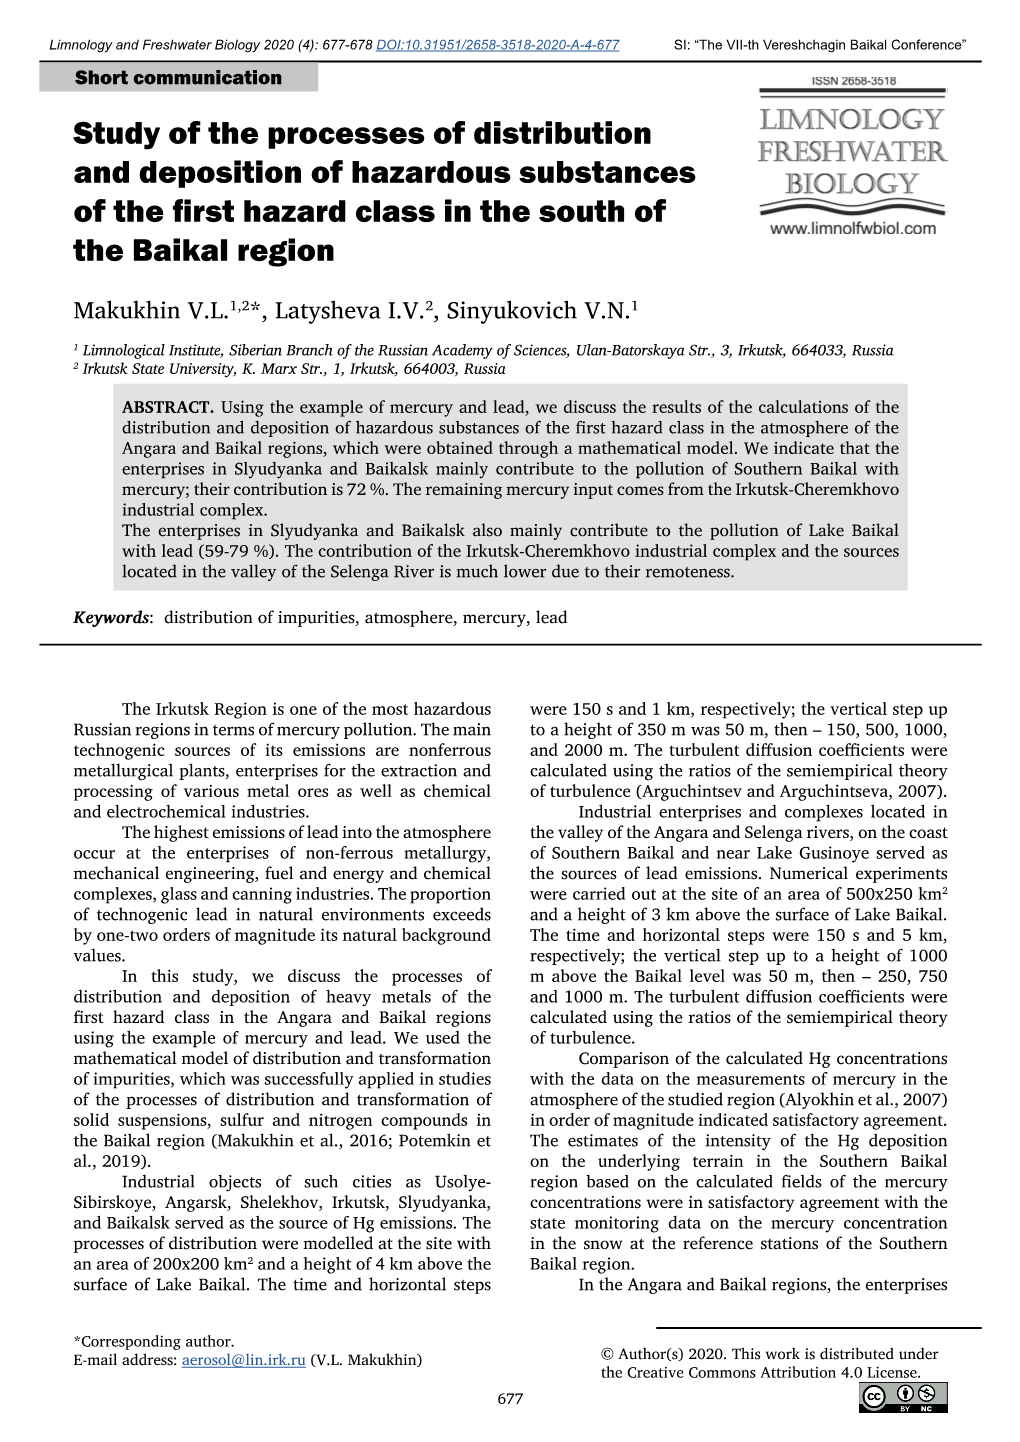 Study of the Processes of Distribution and Deposition of Hazardous Substances of the First Hazard Class in the South of the Baikal Region